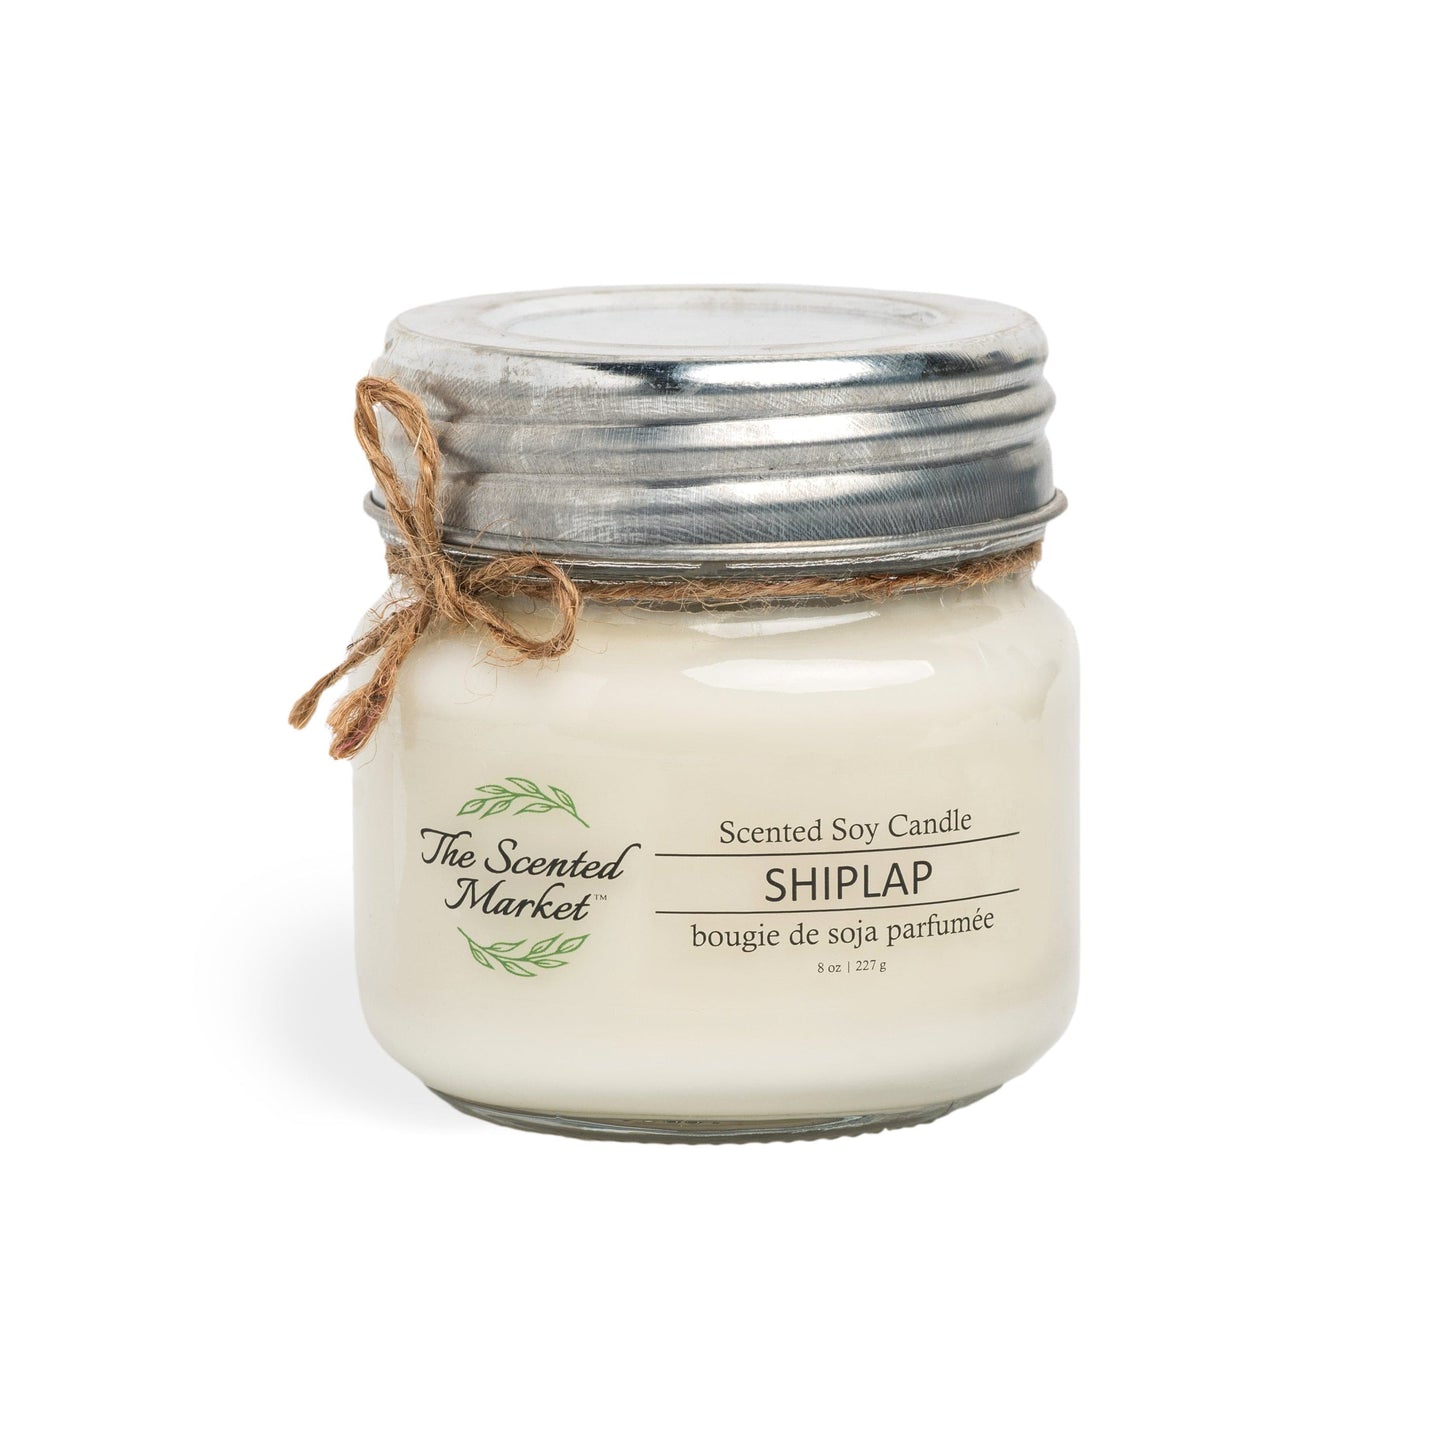 Shiplap Scented Soy Wax Candle